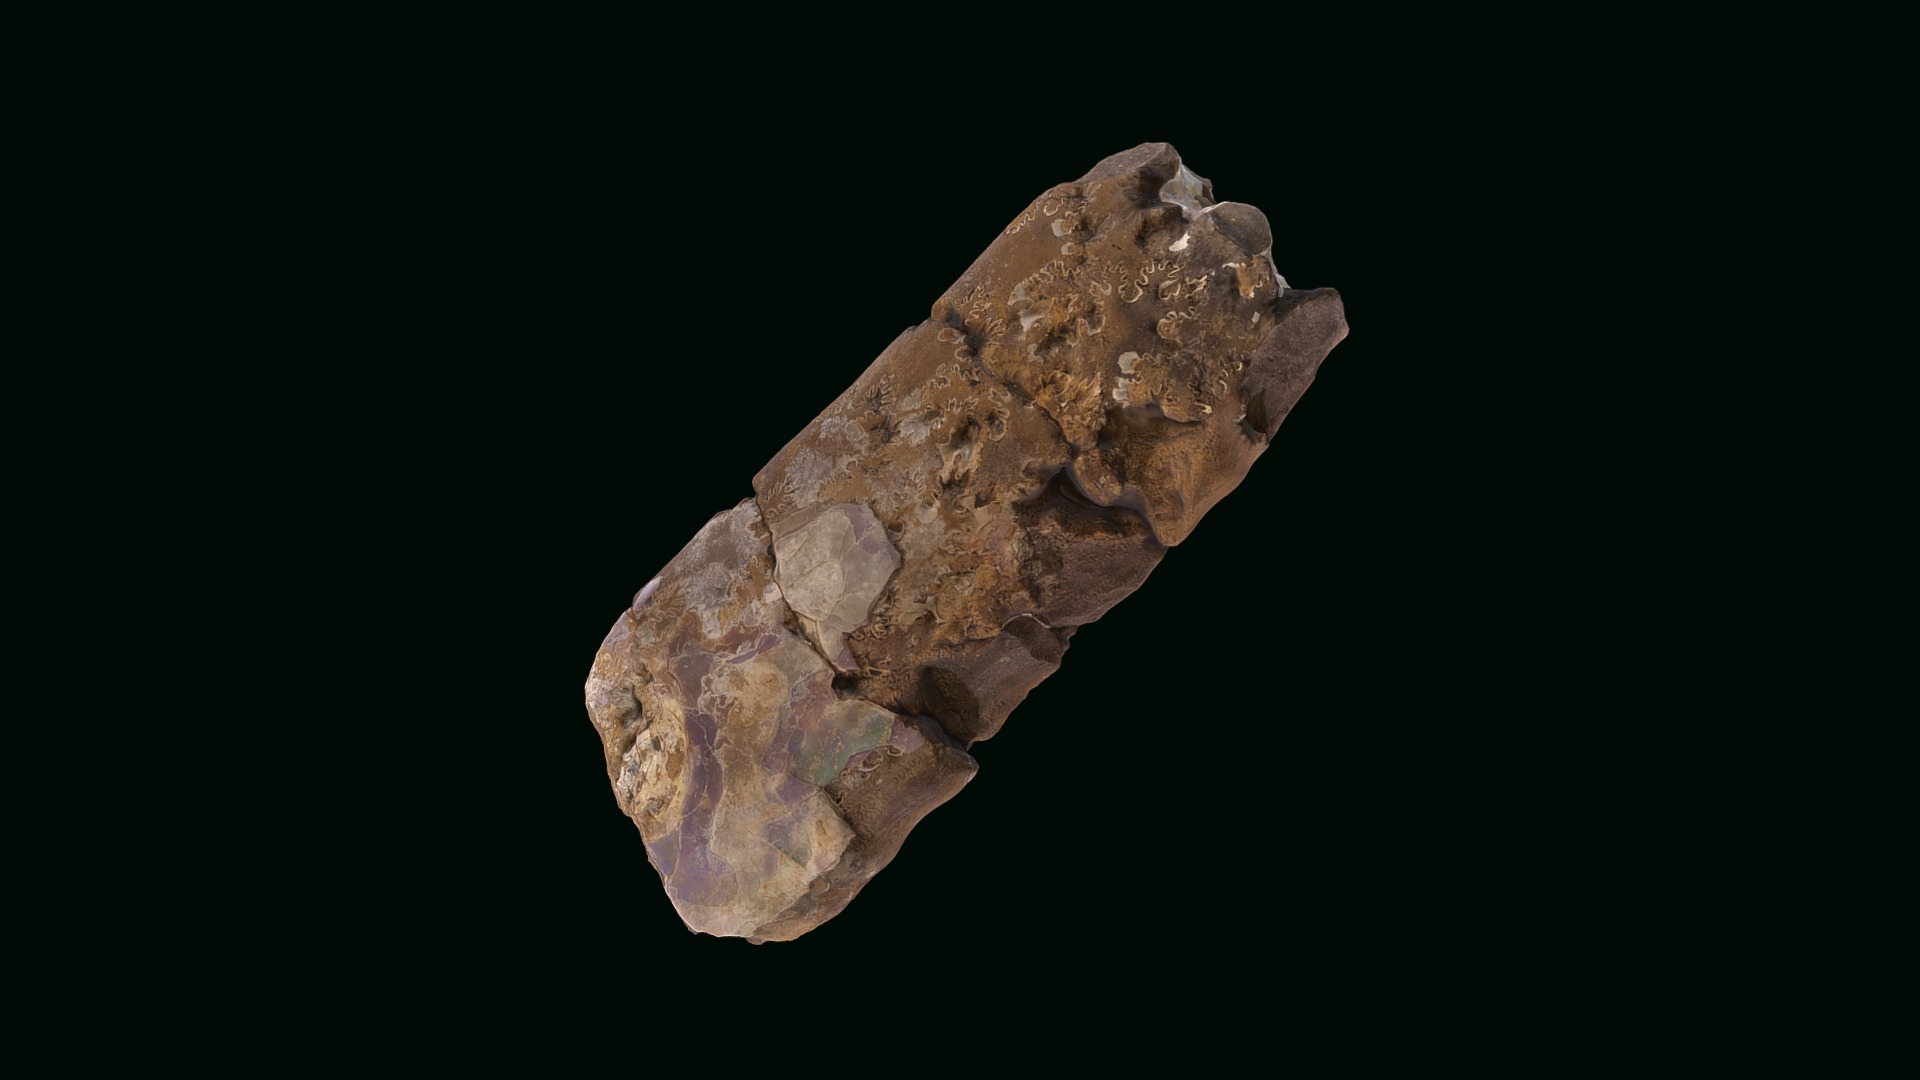 3D model Baculites rugosus D2193 - This is a 3D model of the Baculites rugosus D2193. The 3D model is about a rock with a dark background.